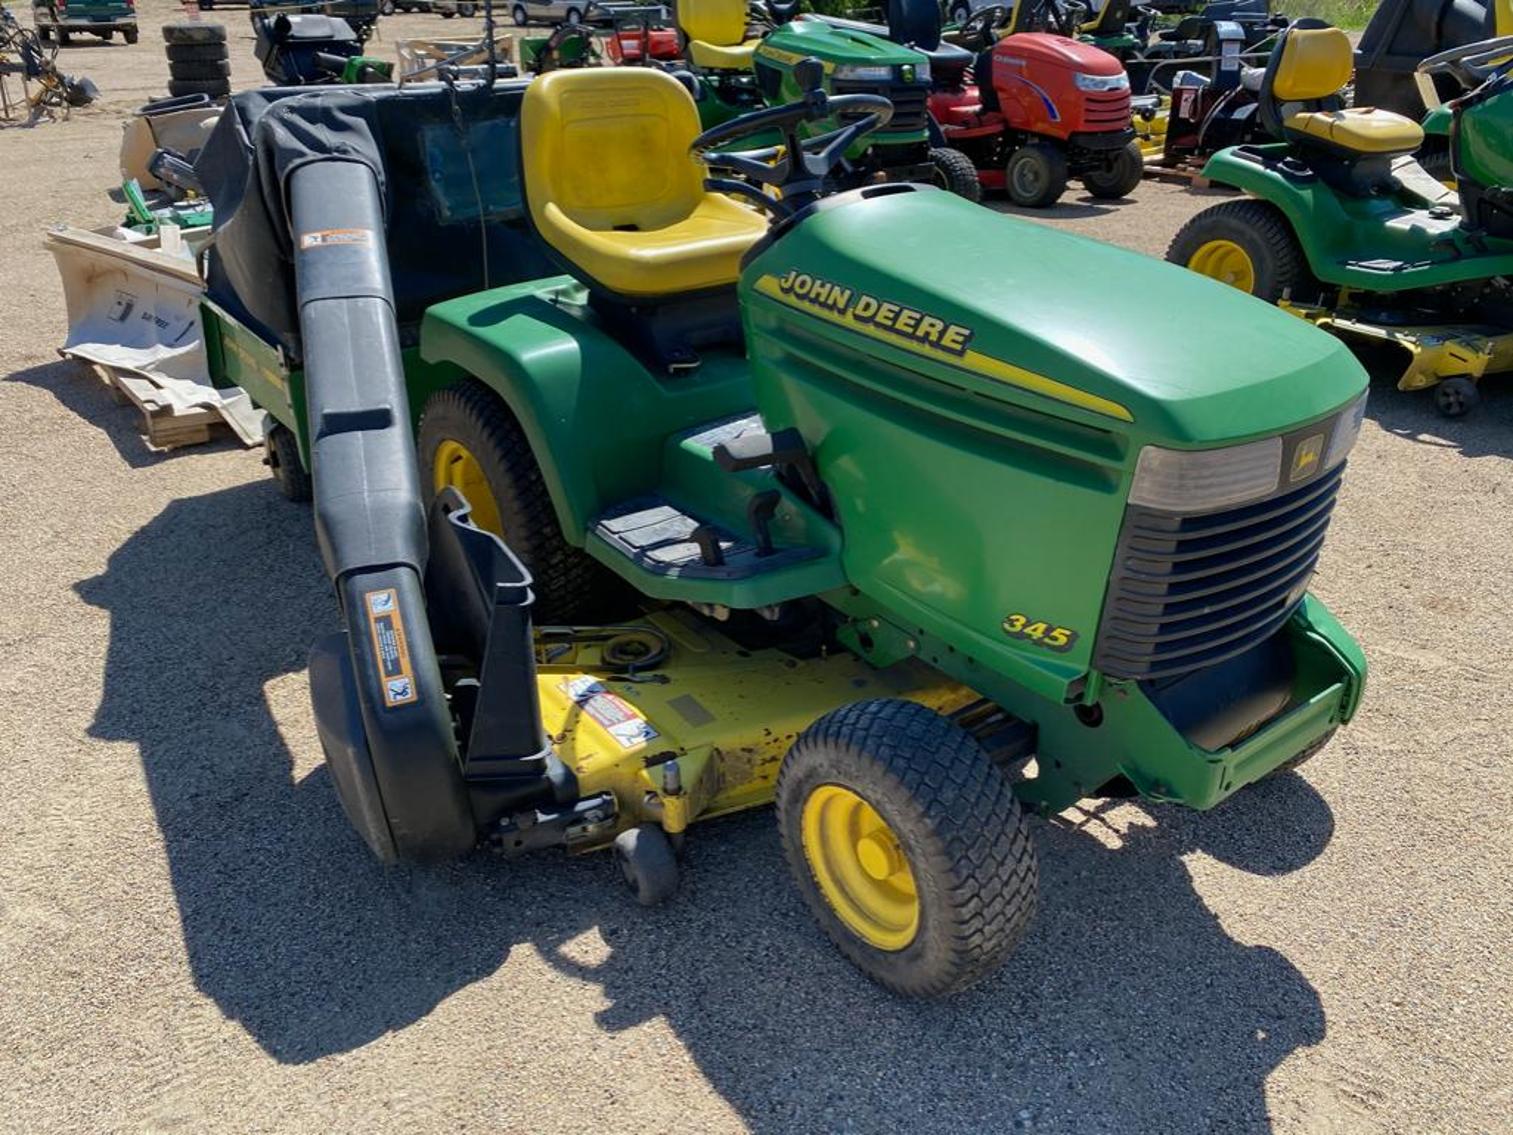 Northwoods Auction Co. Lawn Mower & Equipment Auction